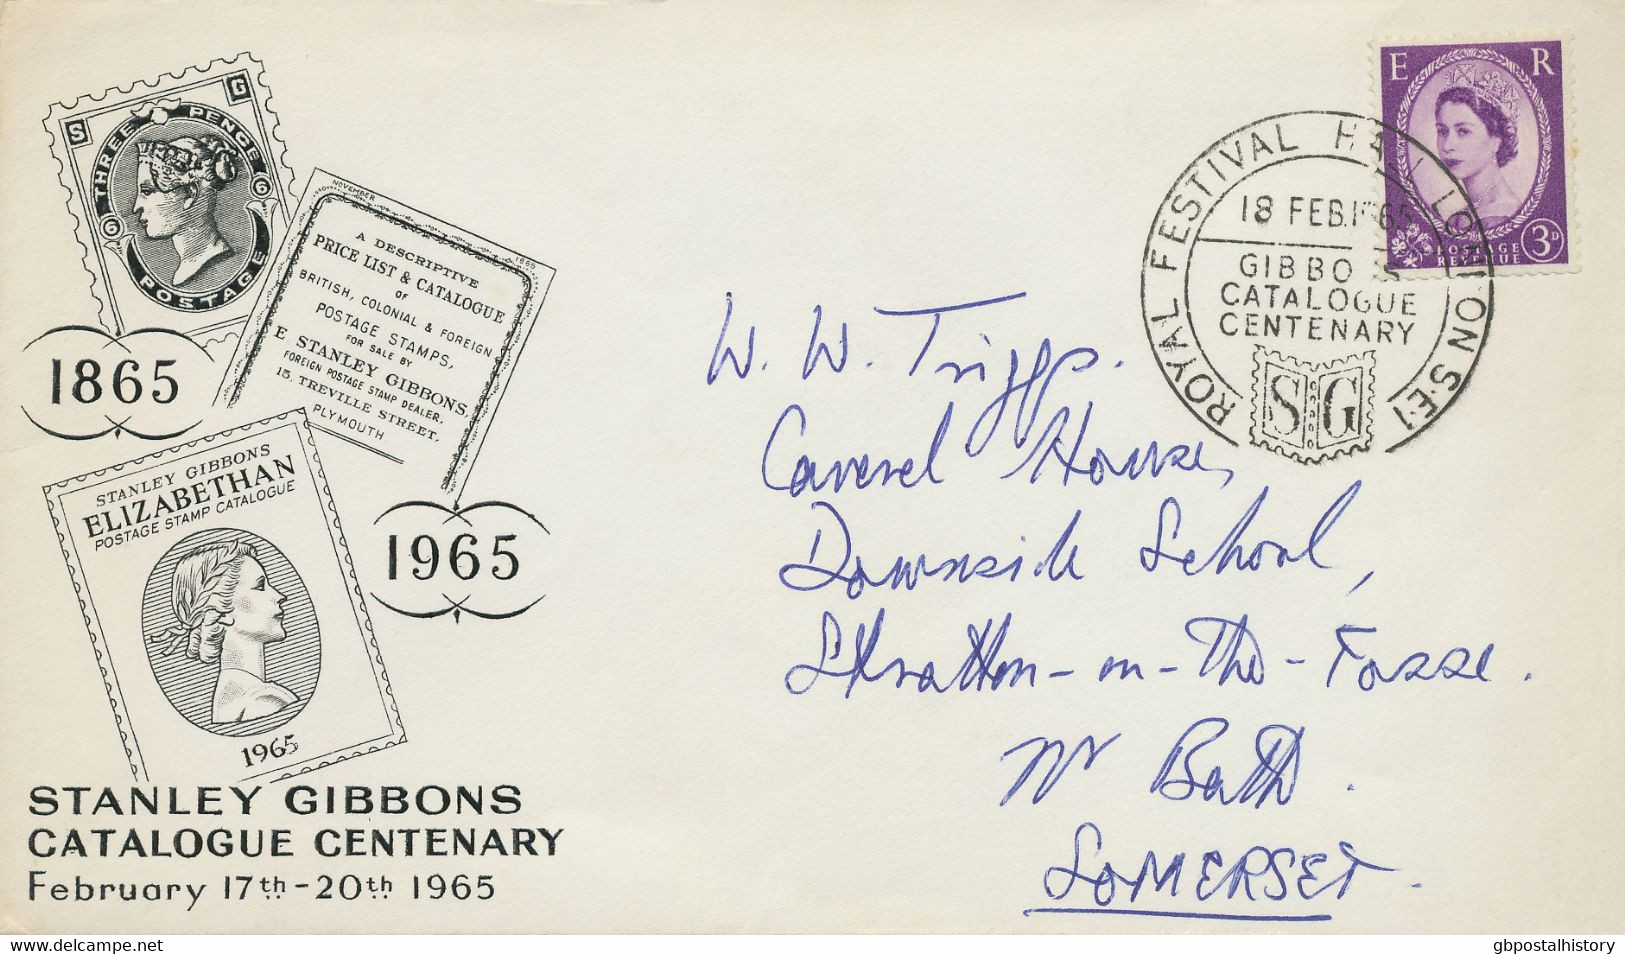 GB SPECIAL EVENT POSTMARK 1965 ROYAL FESTIVAL HALL LONDON S.E.1 GIBBONS CATALOGUE CENTENARY - Covers & Documents